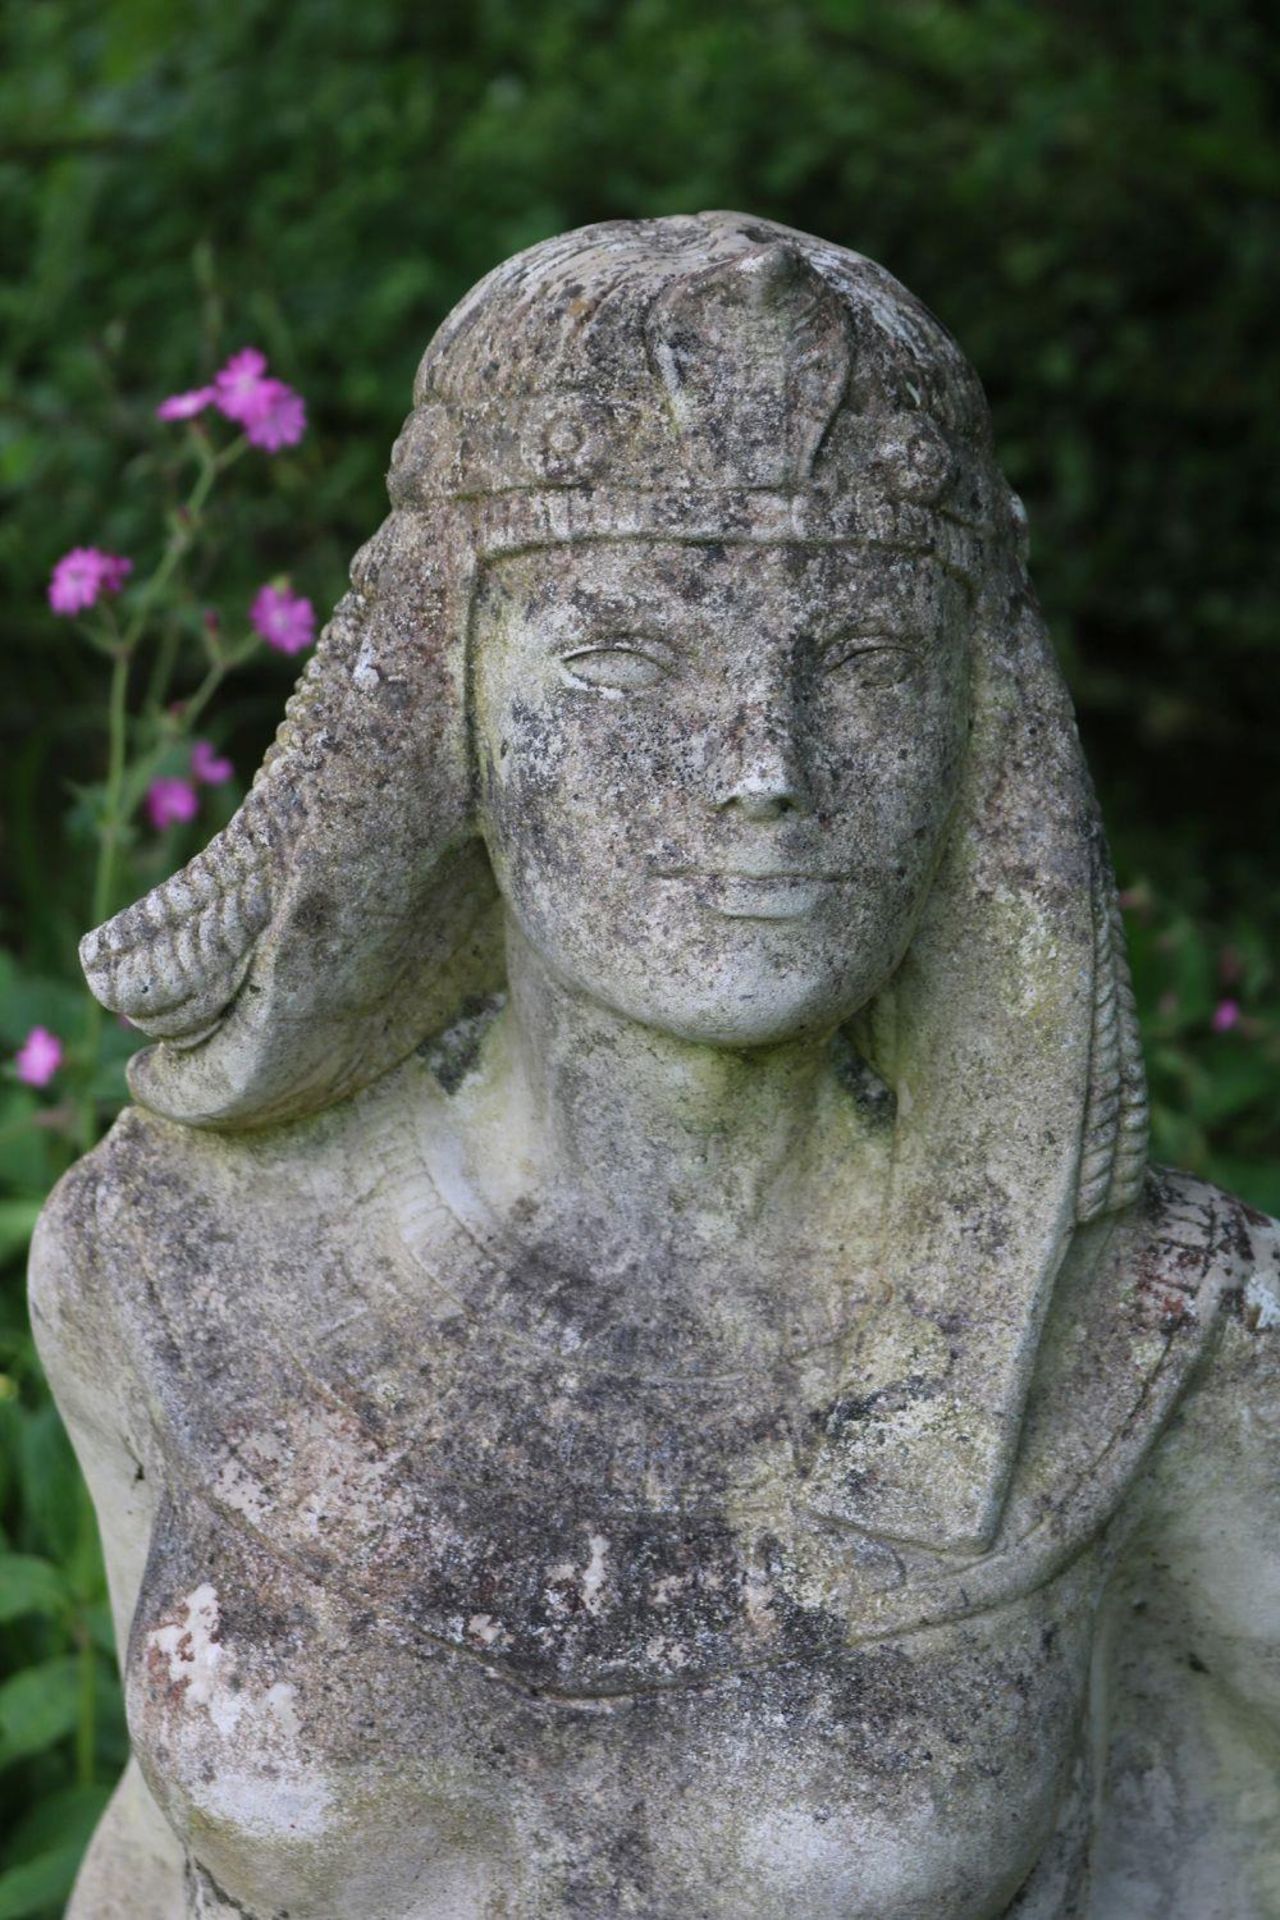 MOULDED STONE GARDEN SCULPTURE - Image 2 of 2